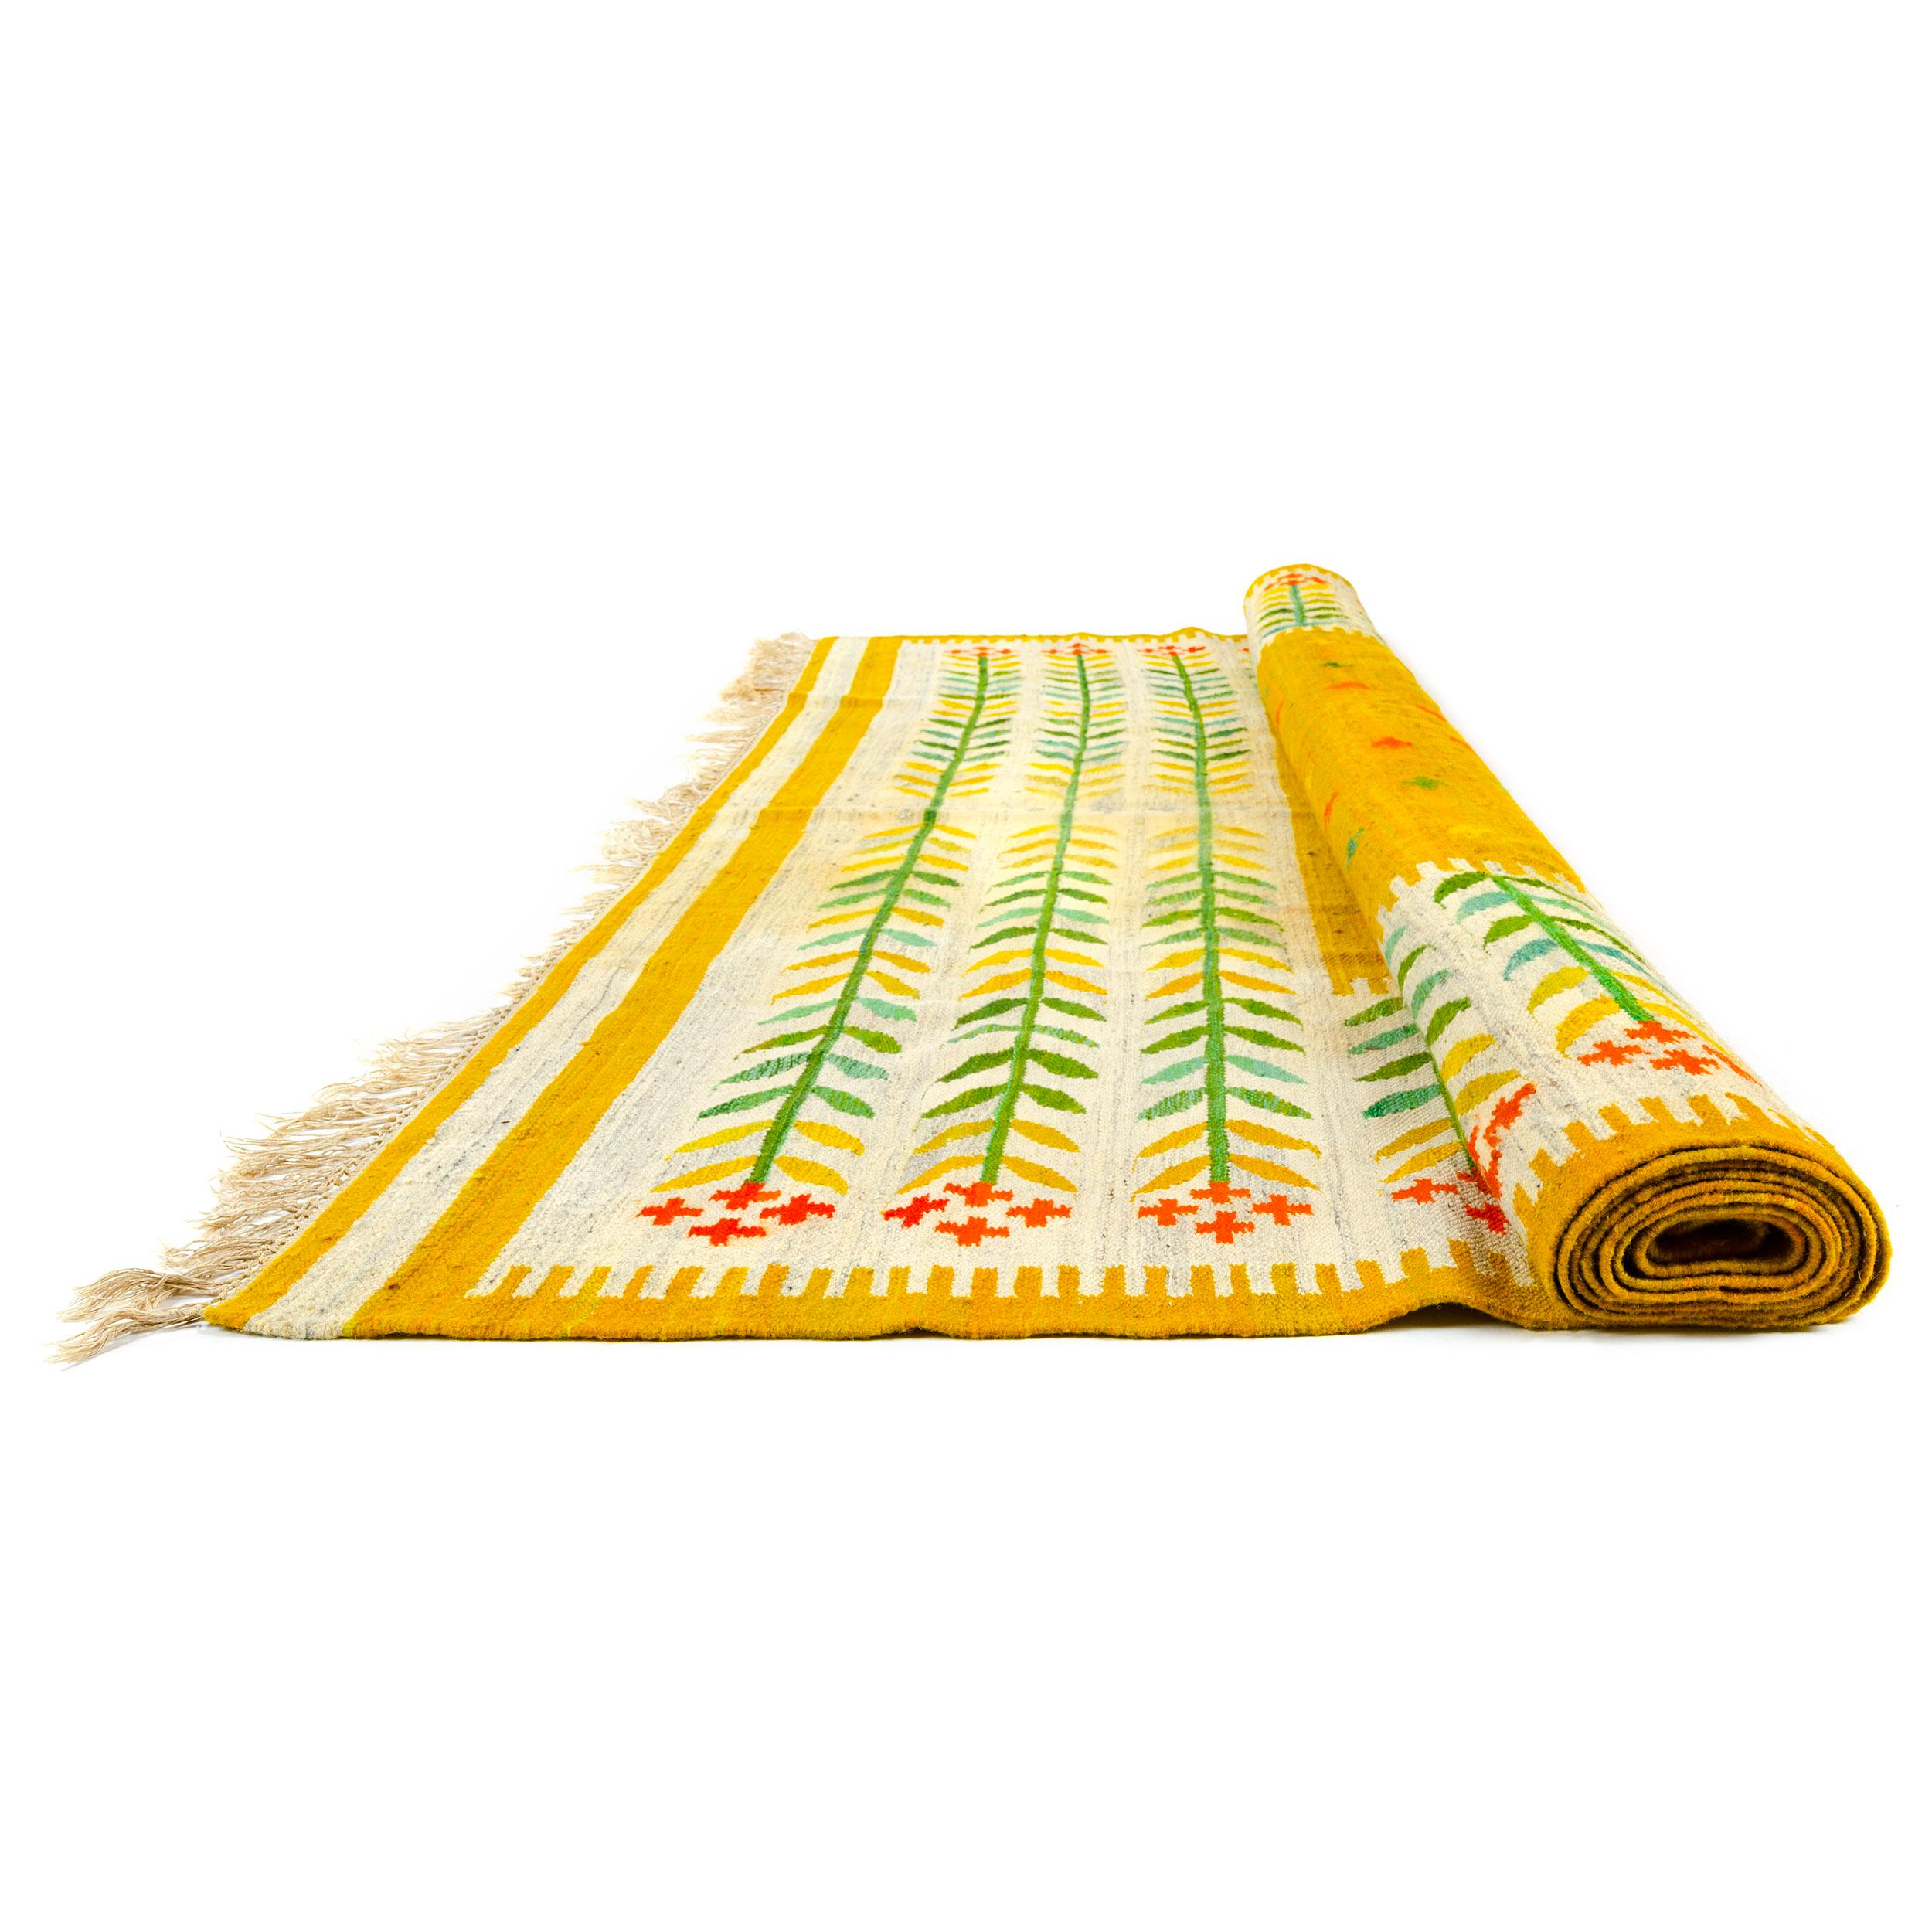 A colorful handwoven wool rug with a bright botanical motif.